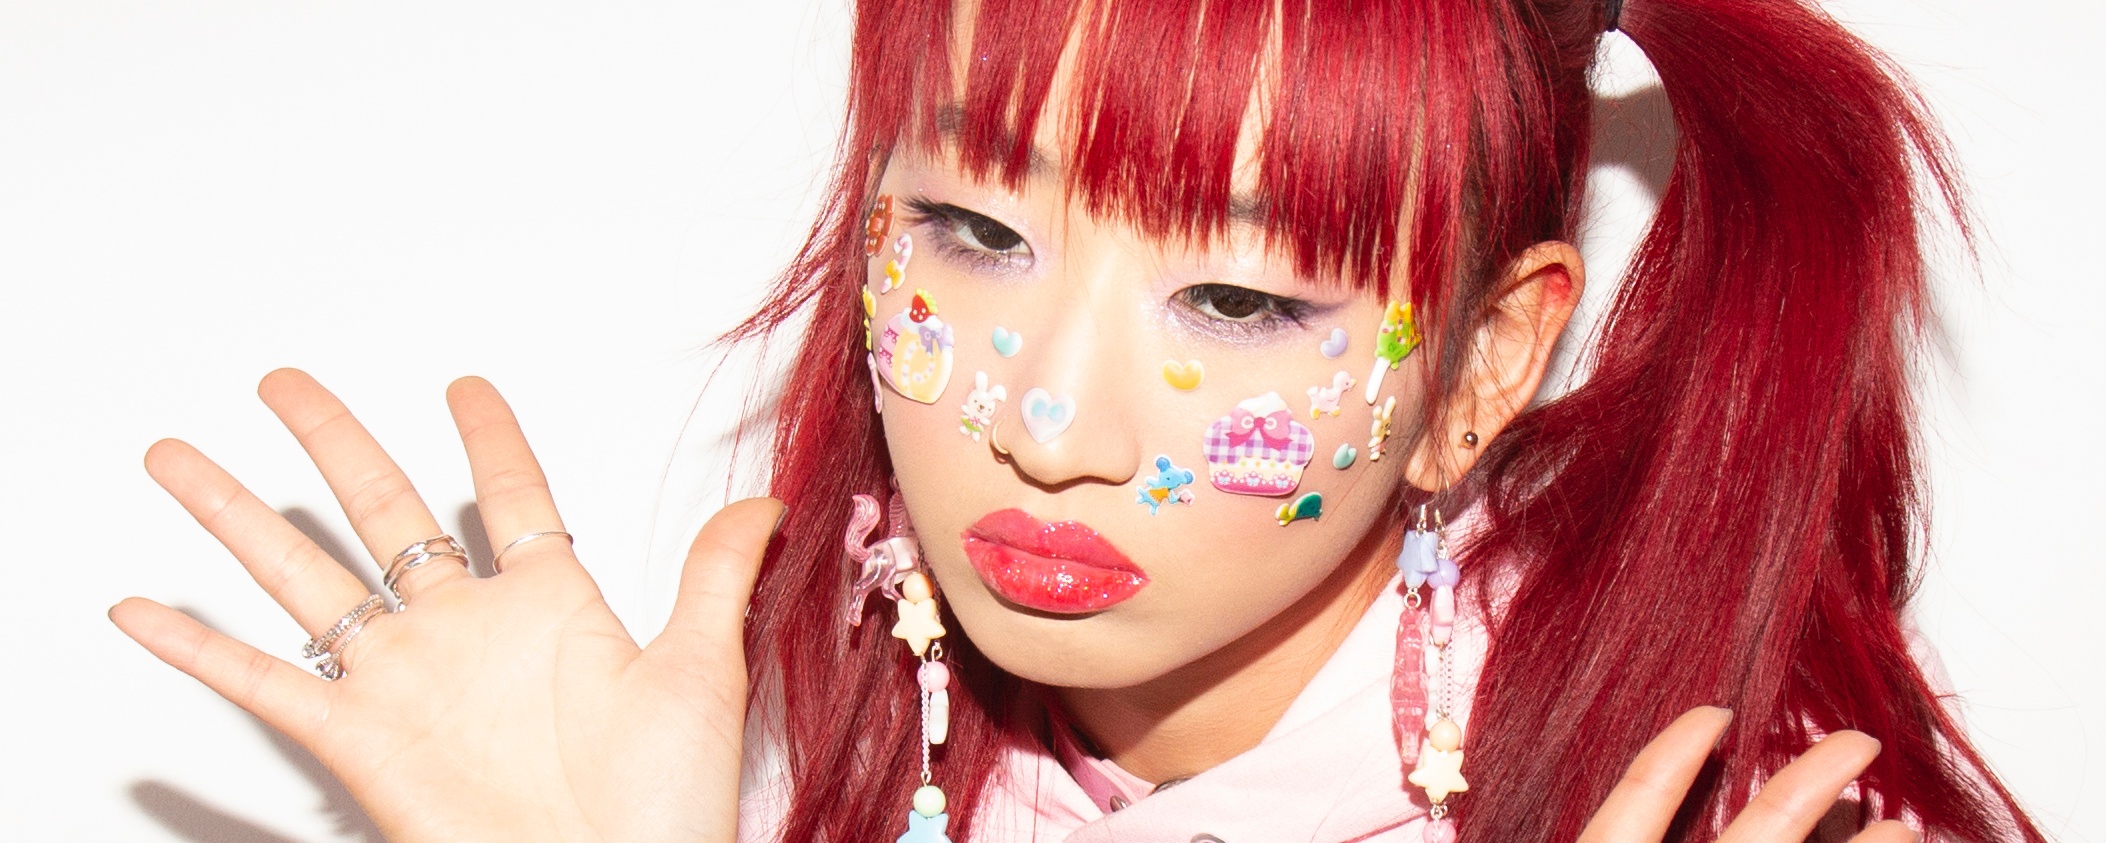 Rising Hyperpop Screamo Star, Lil Mariko, Joins Four Loko Records Roster With New Single “Boring”